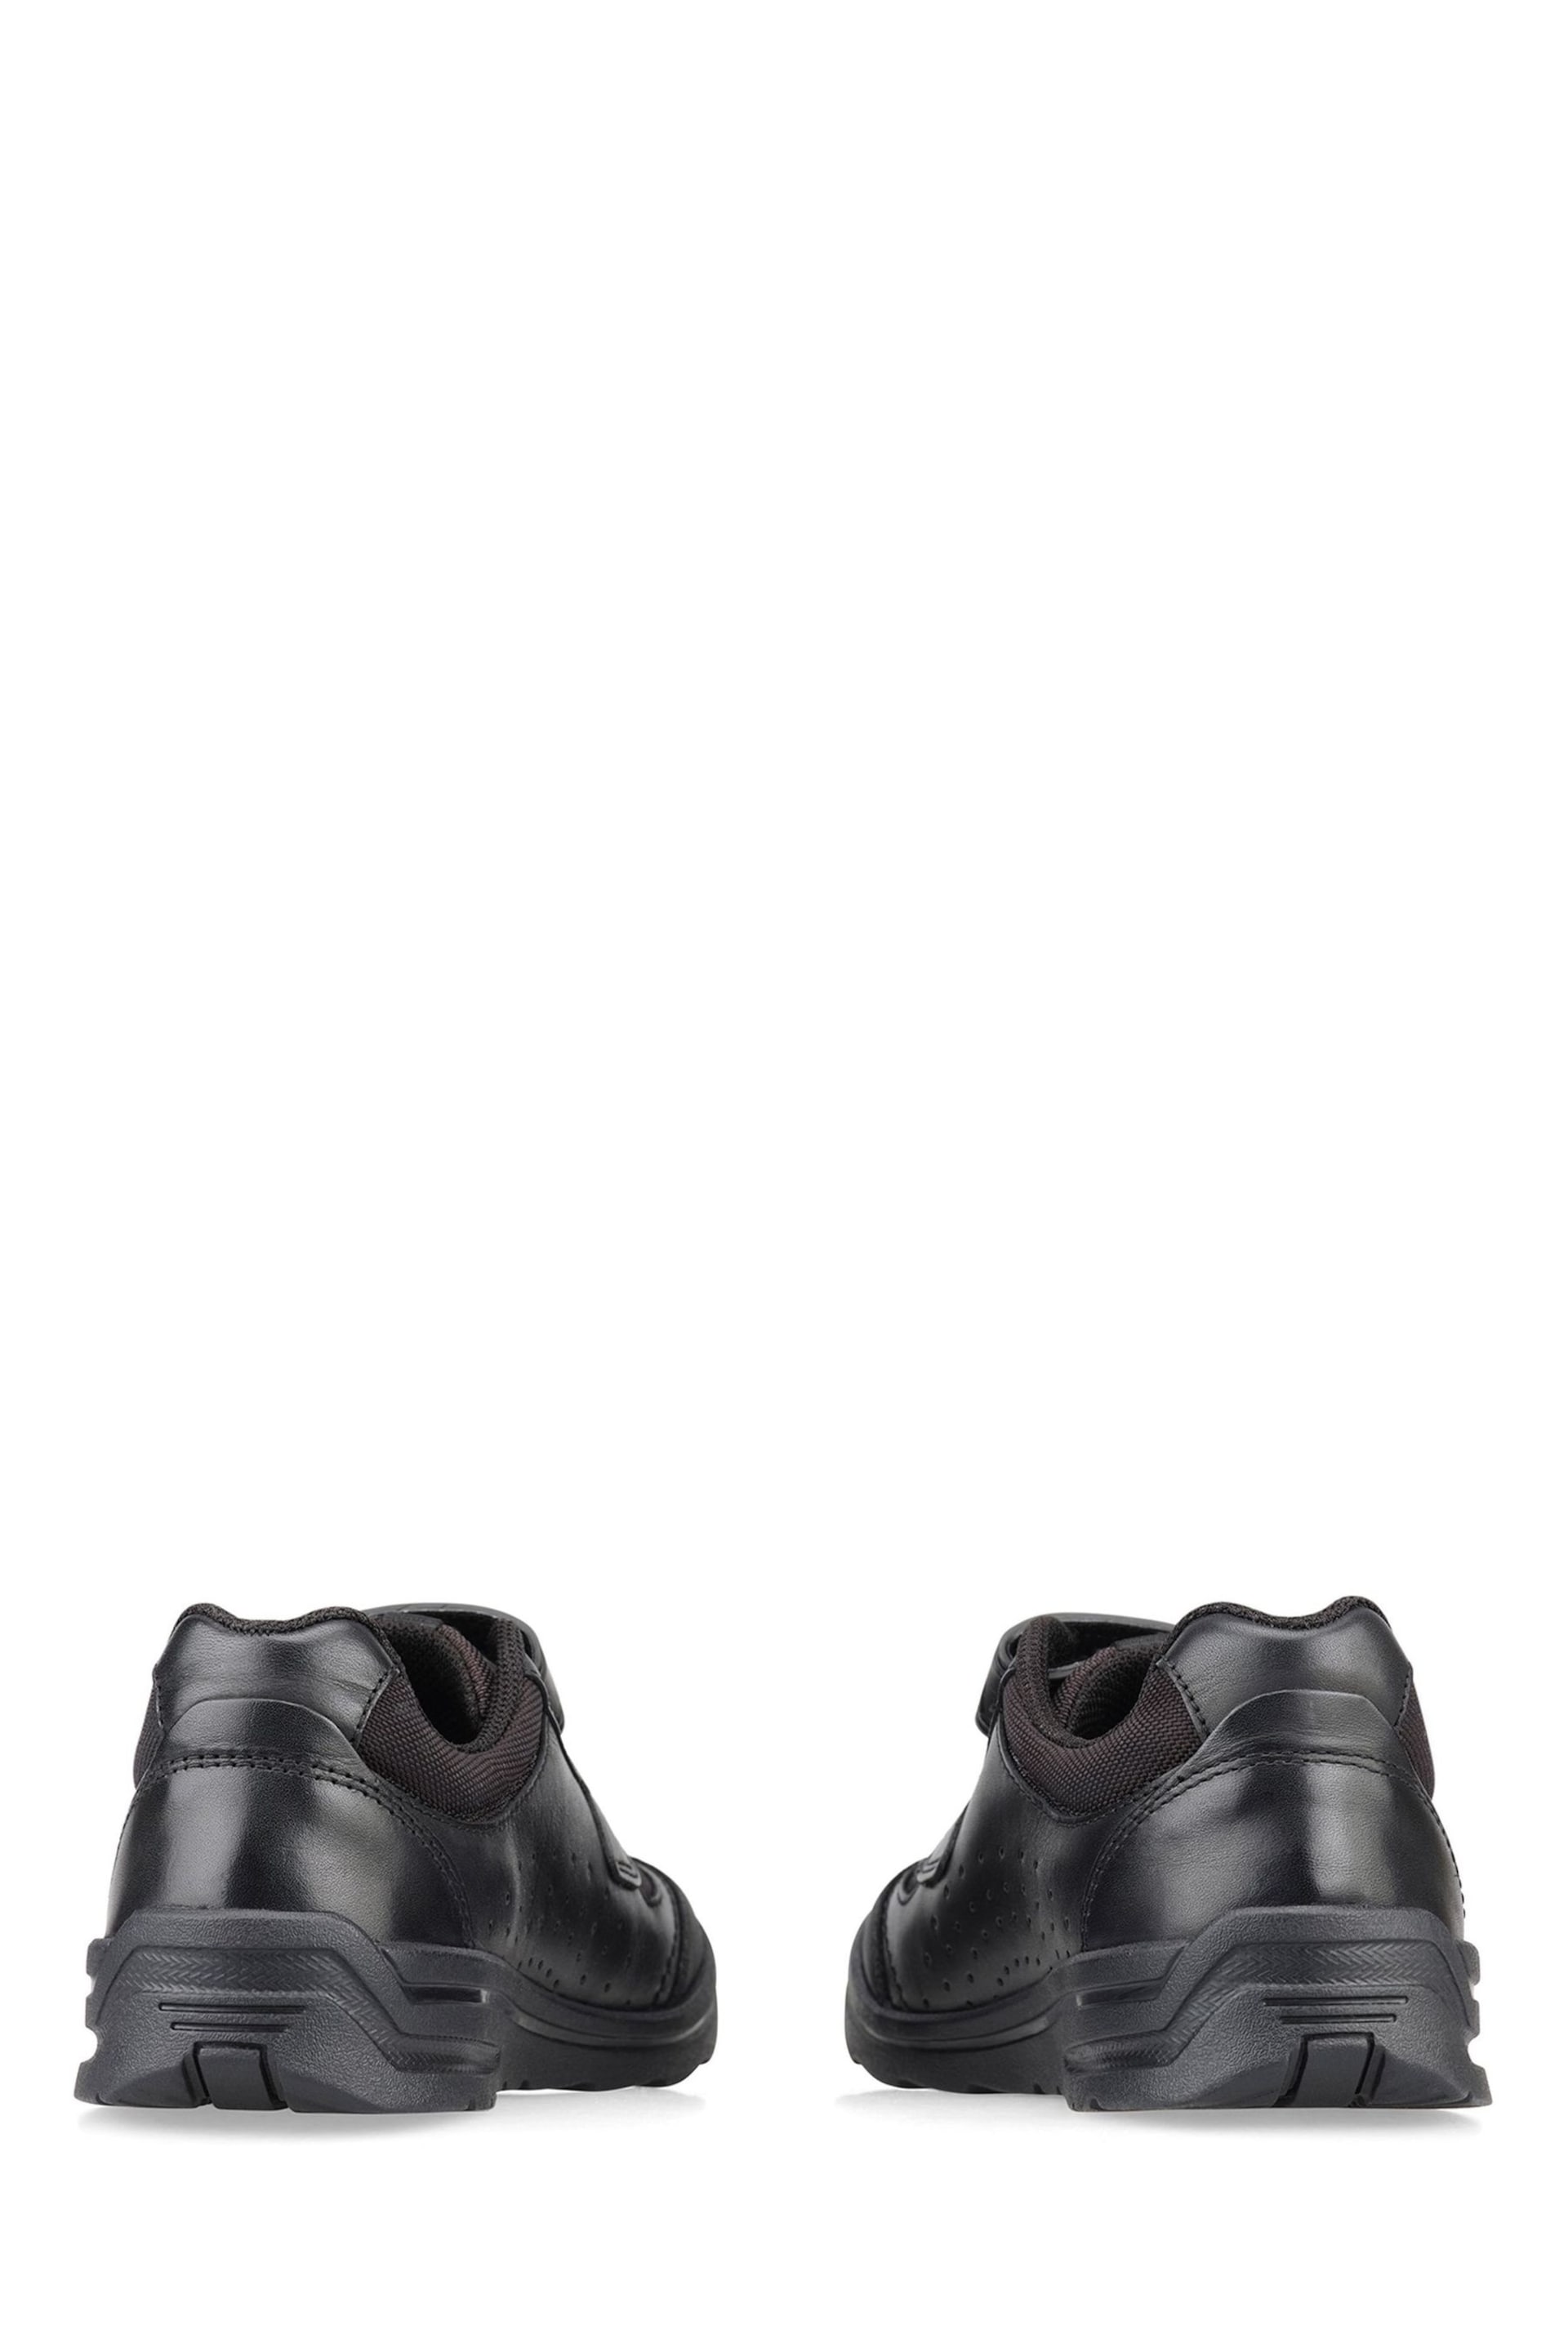 Start-Rite Rocket Black Leather School Shoes Wide Fit - Image 4 of 7